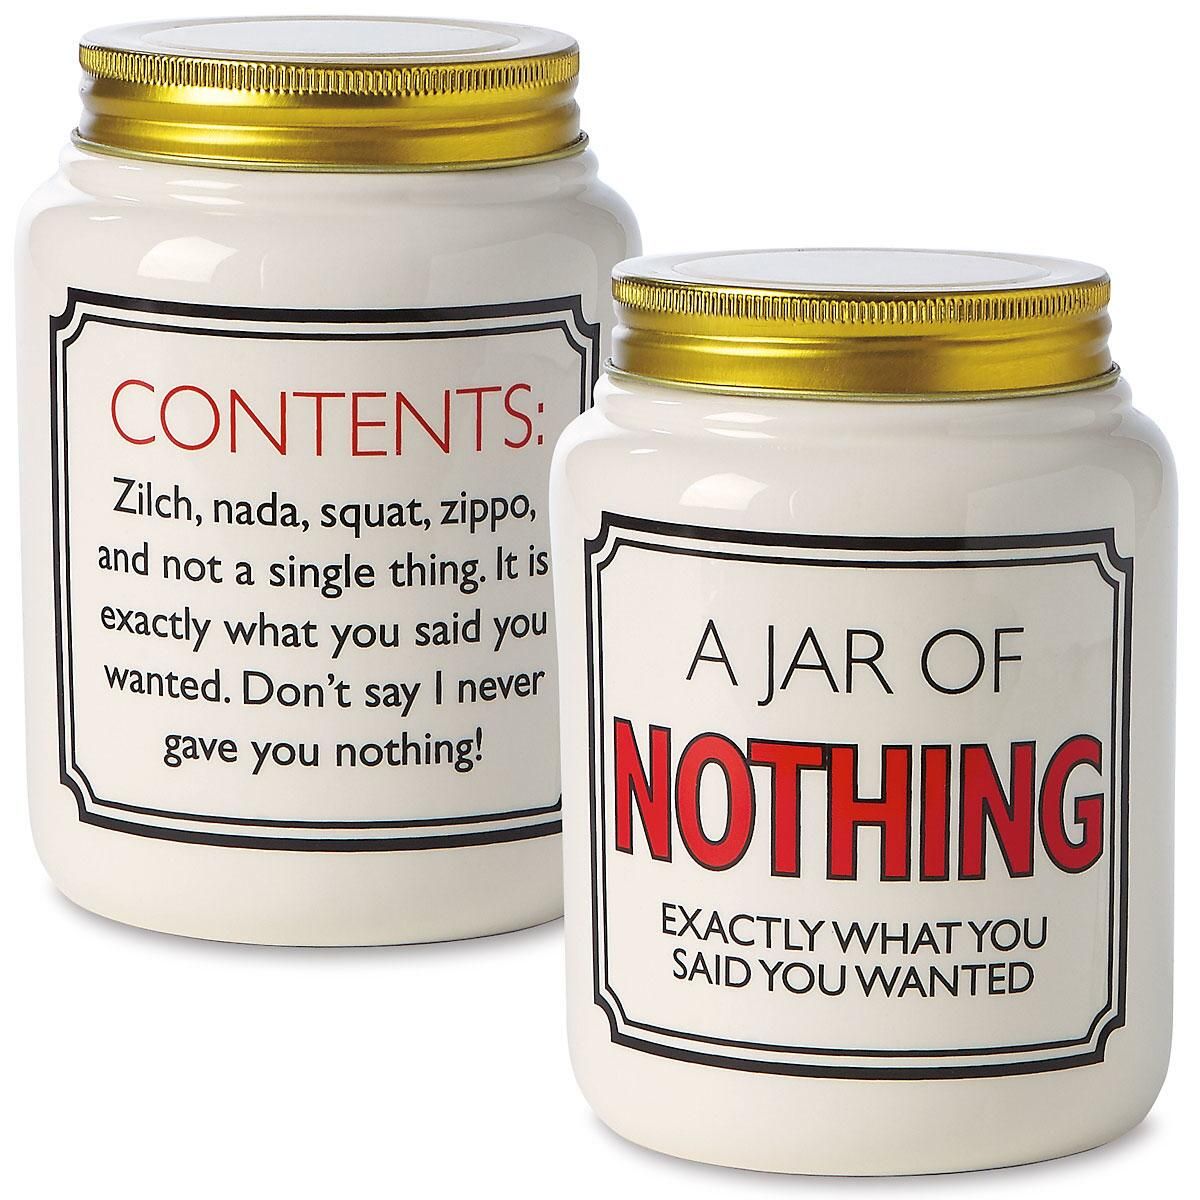 A Jar of Nothing Colorful Images